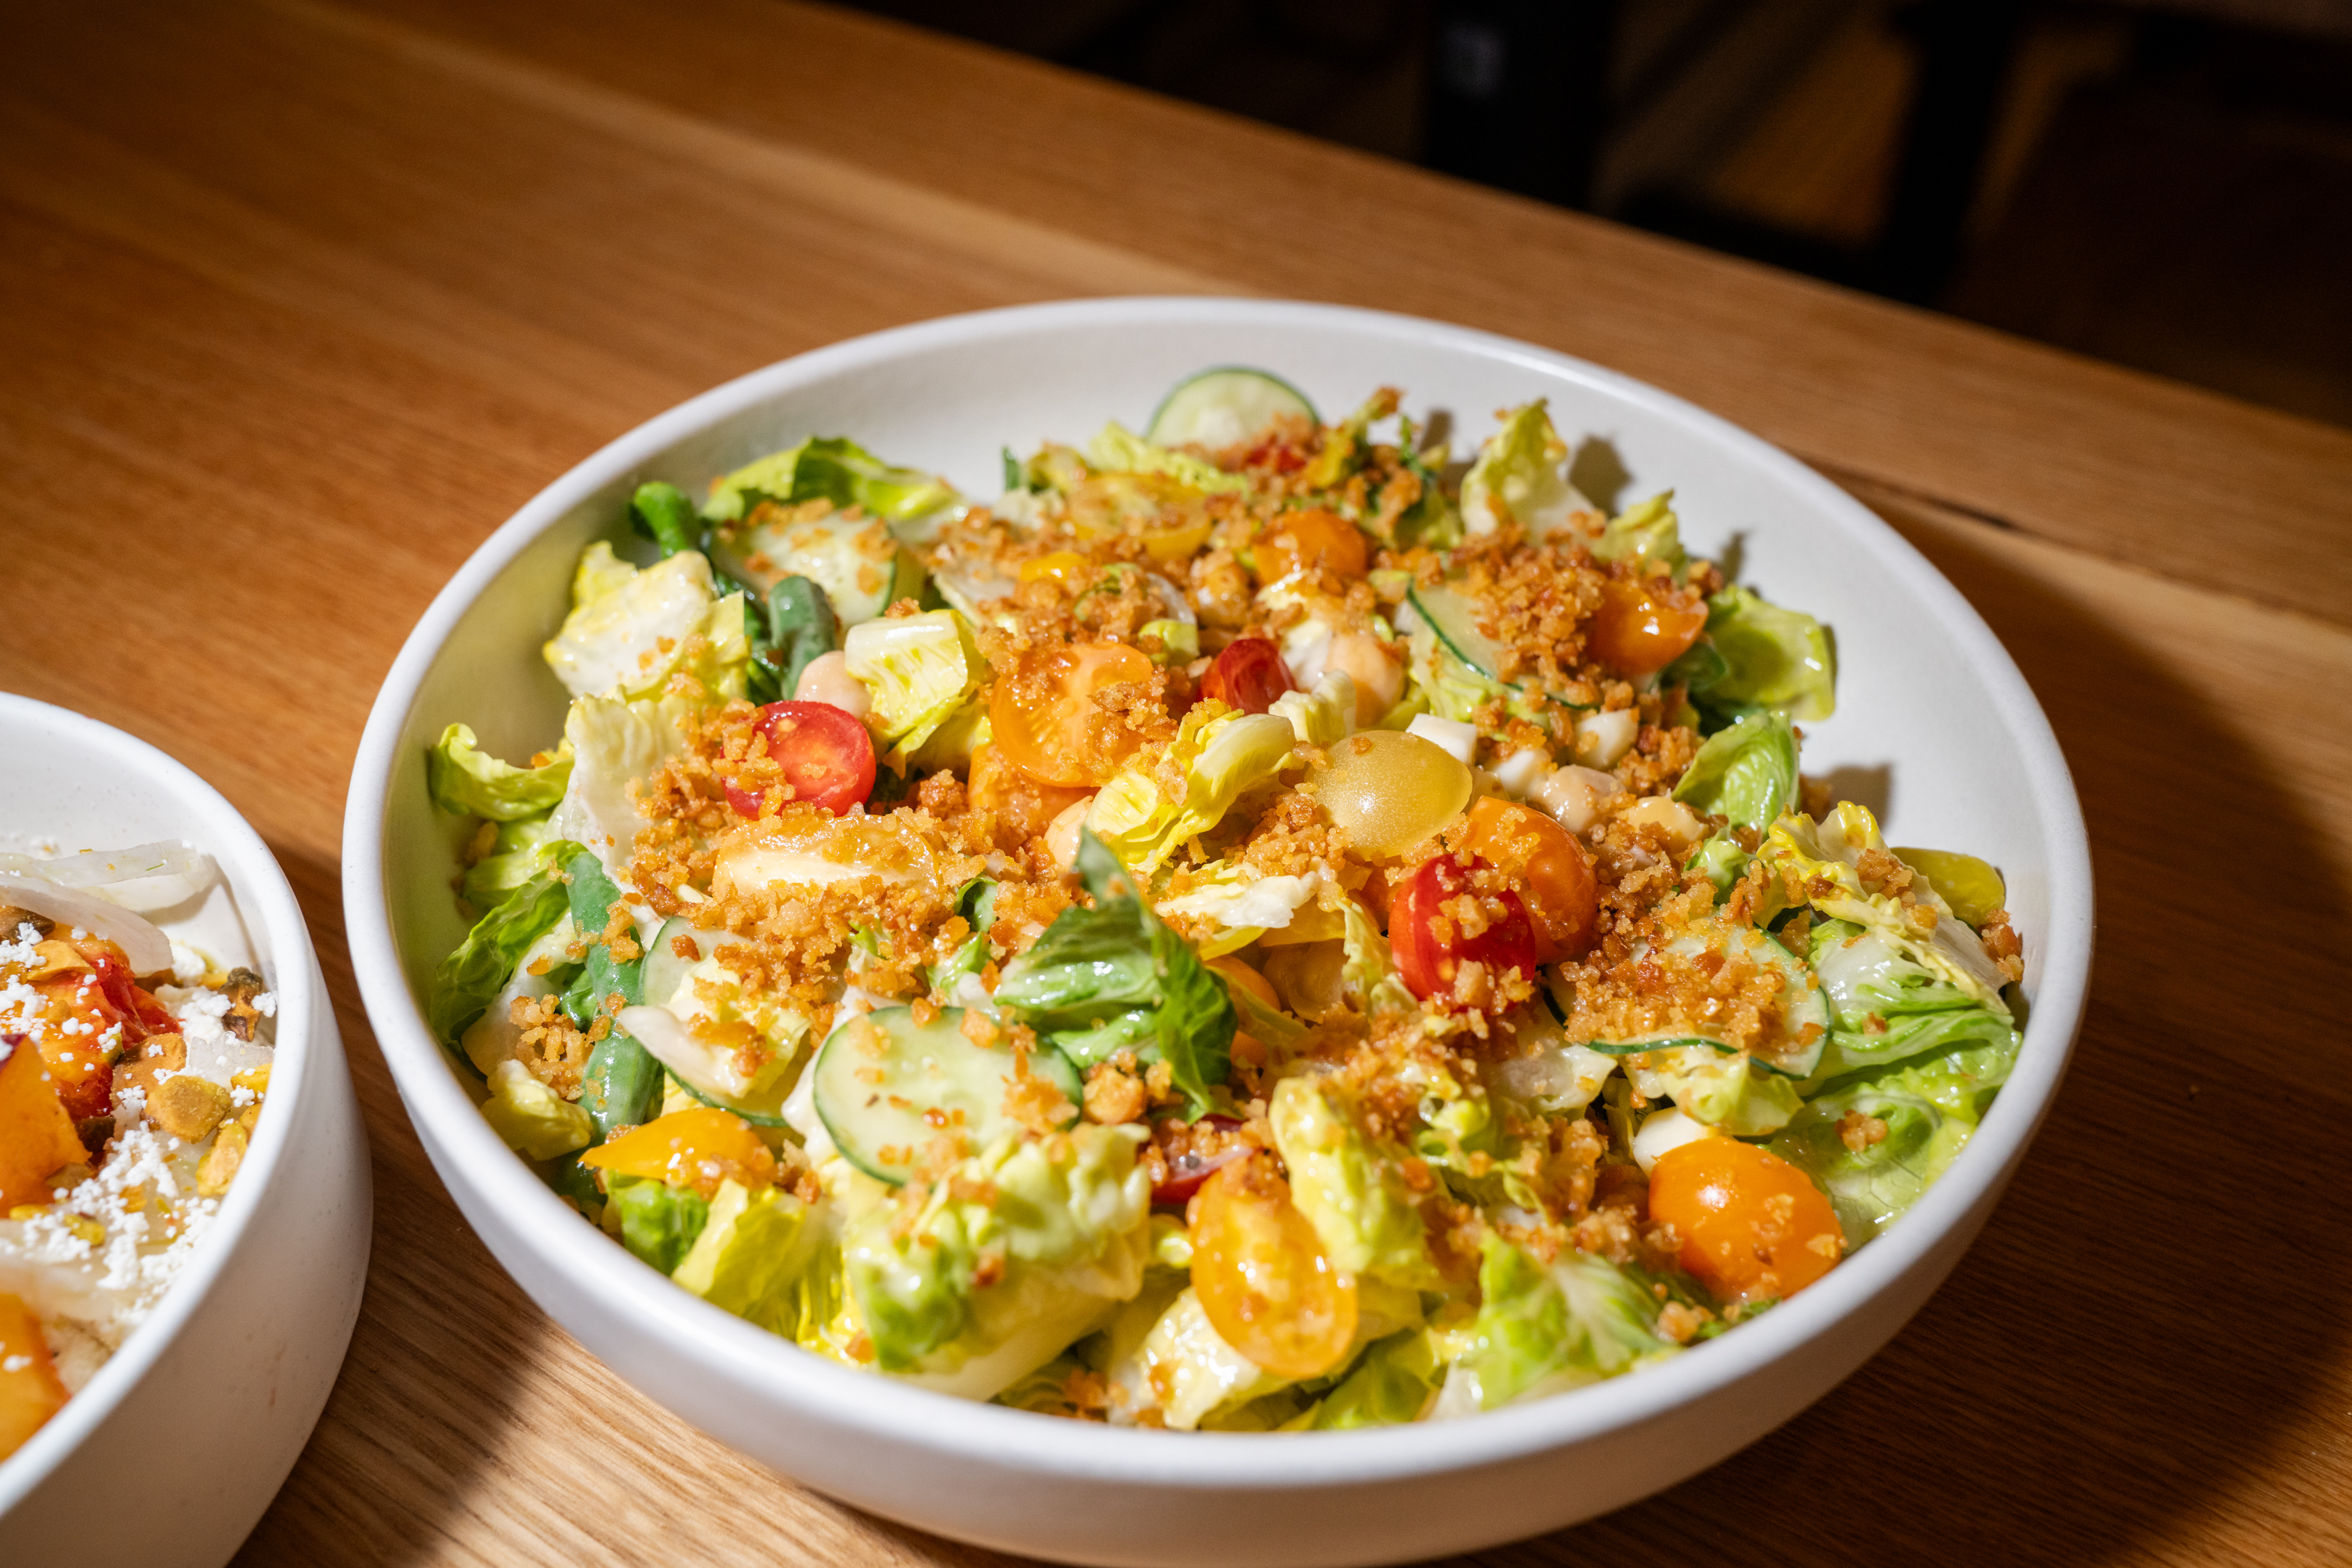 A summer chop salad features market veggies, chickpeas, pepperoncini, parm frico and creamy Italian dressing.